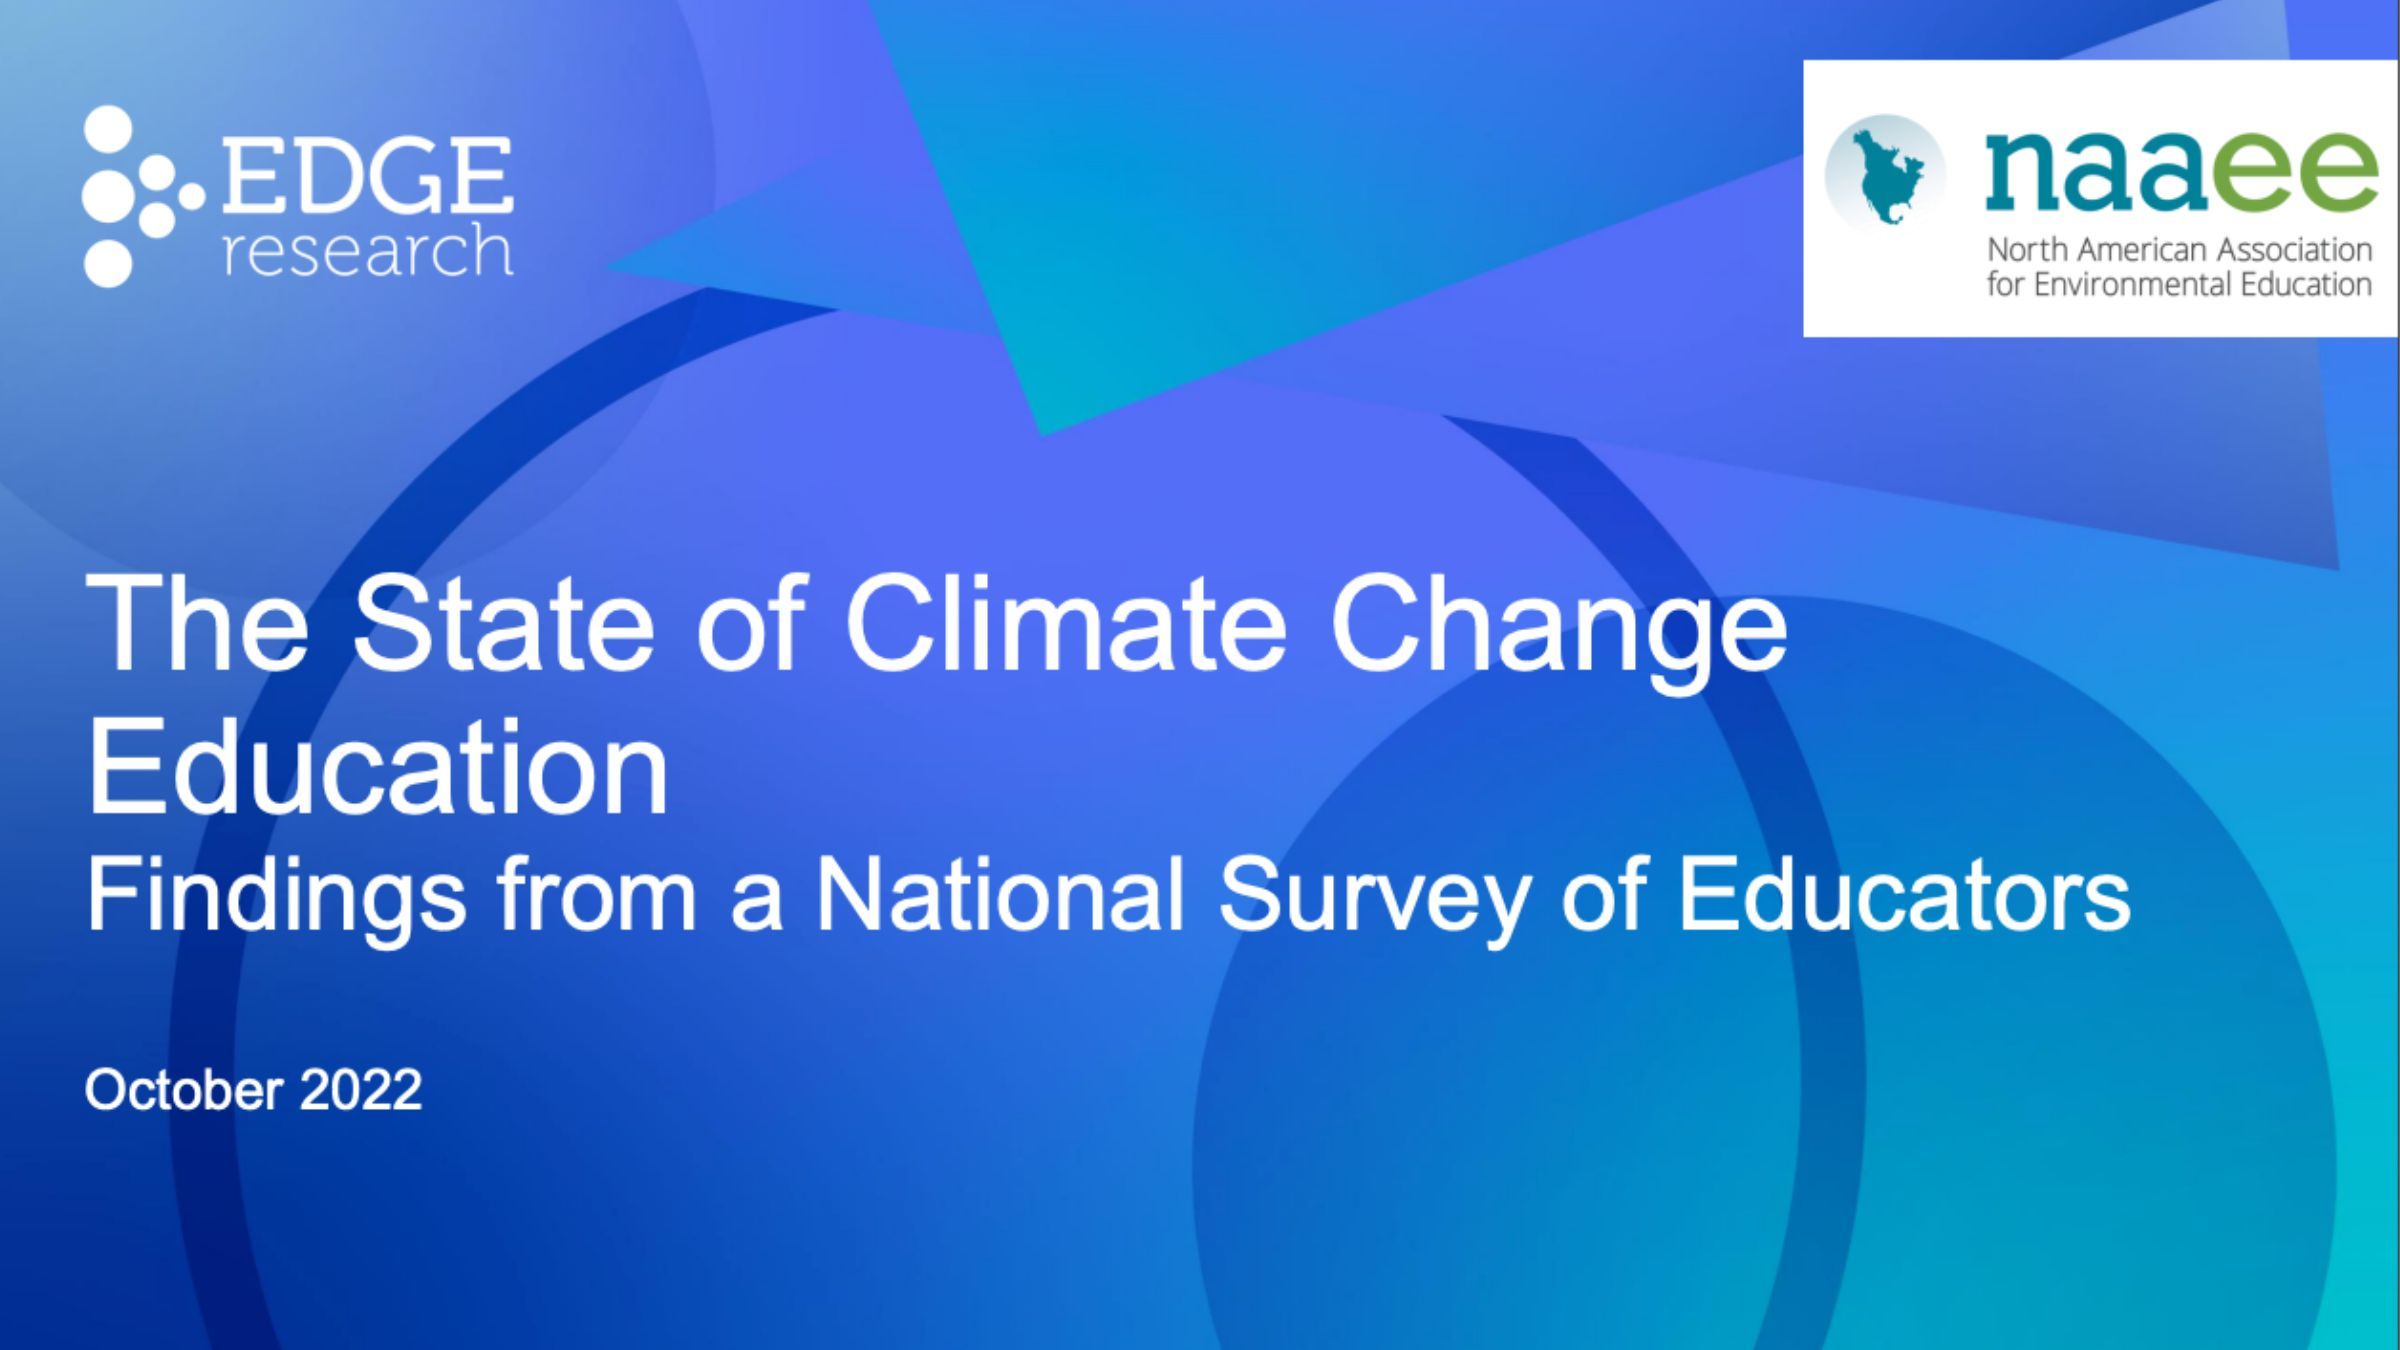 Edge Research, NAAEE Logos on blue graphic background, "The State of Climate Change Education: Findings from a National Survey of Educators, October 2022"